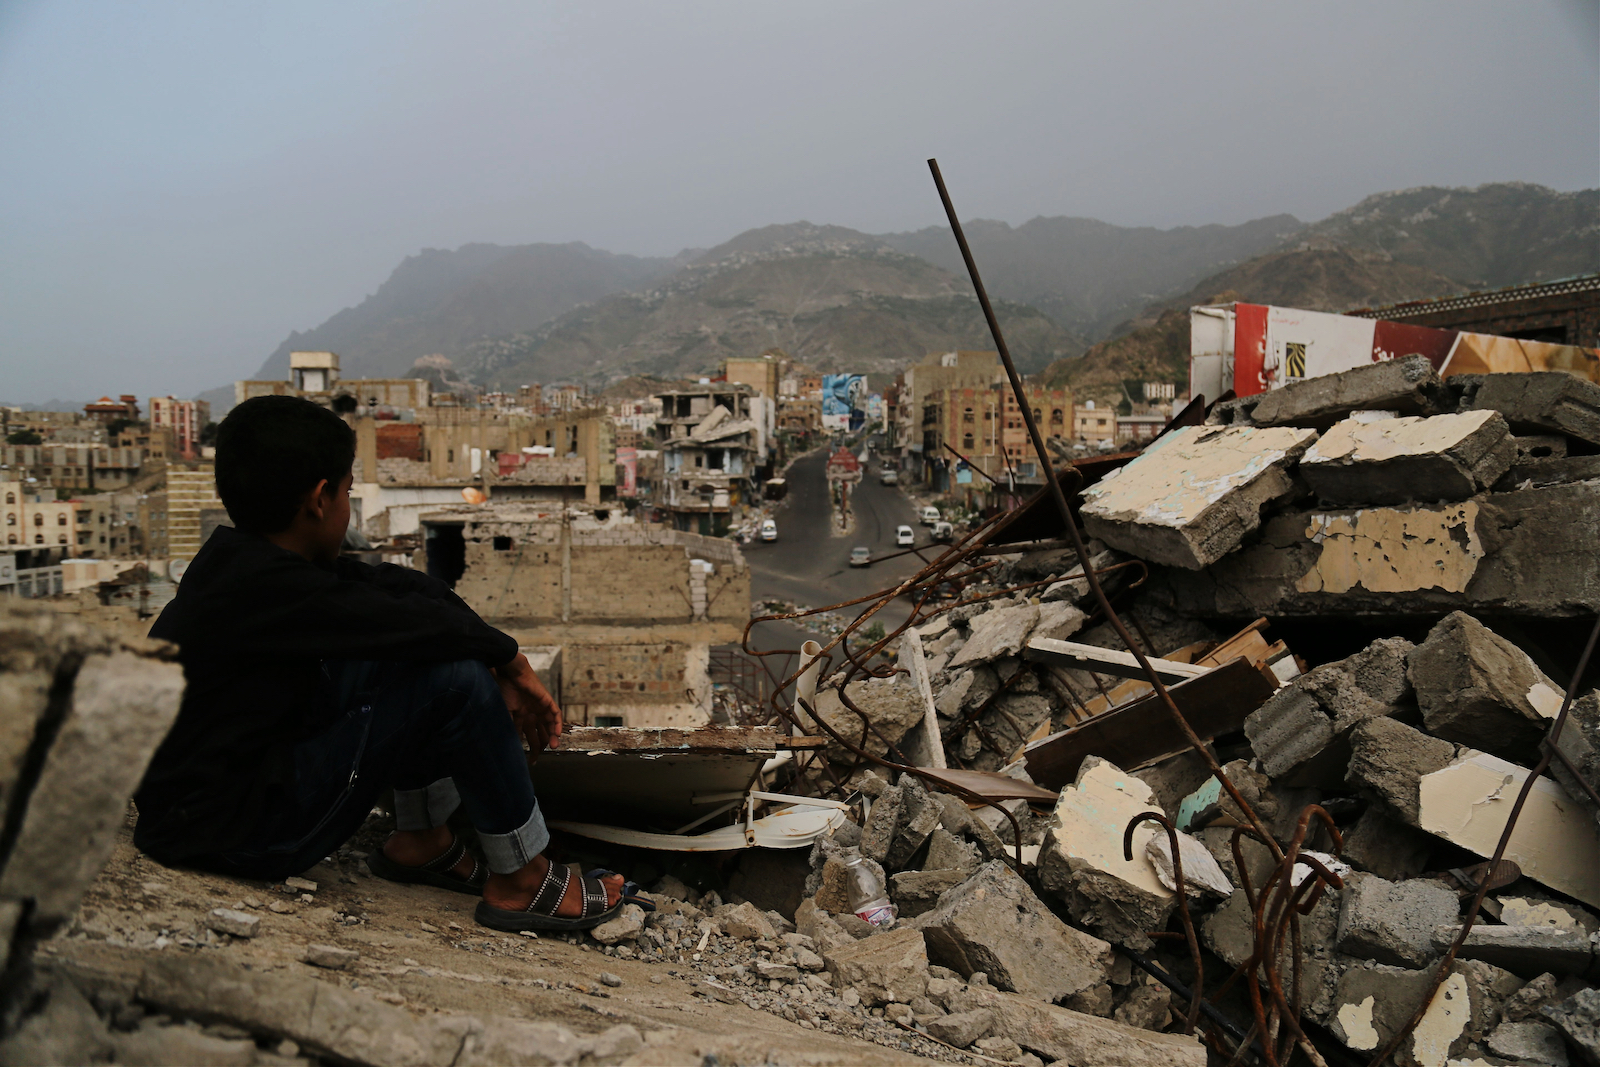 A Yemeni child sits in the ruins of his home in Taizz